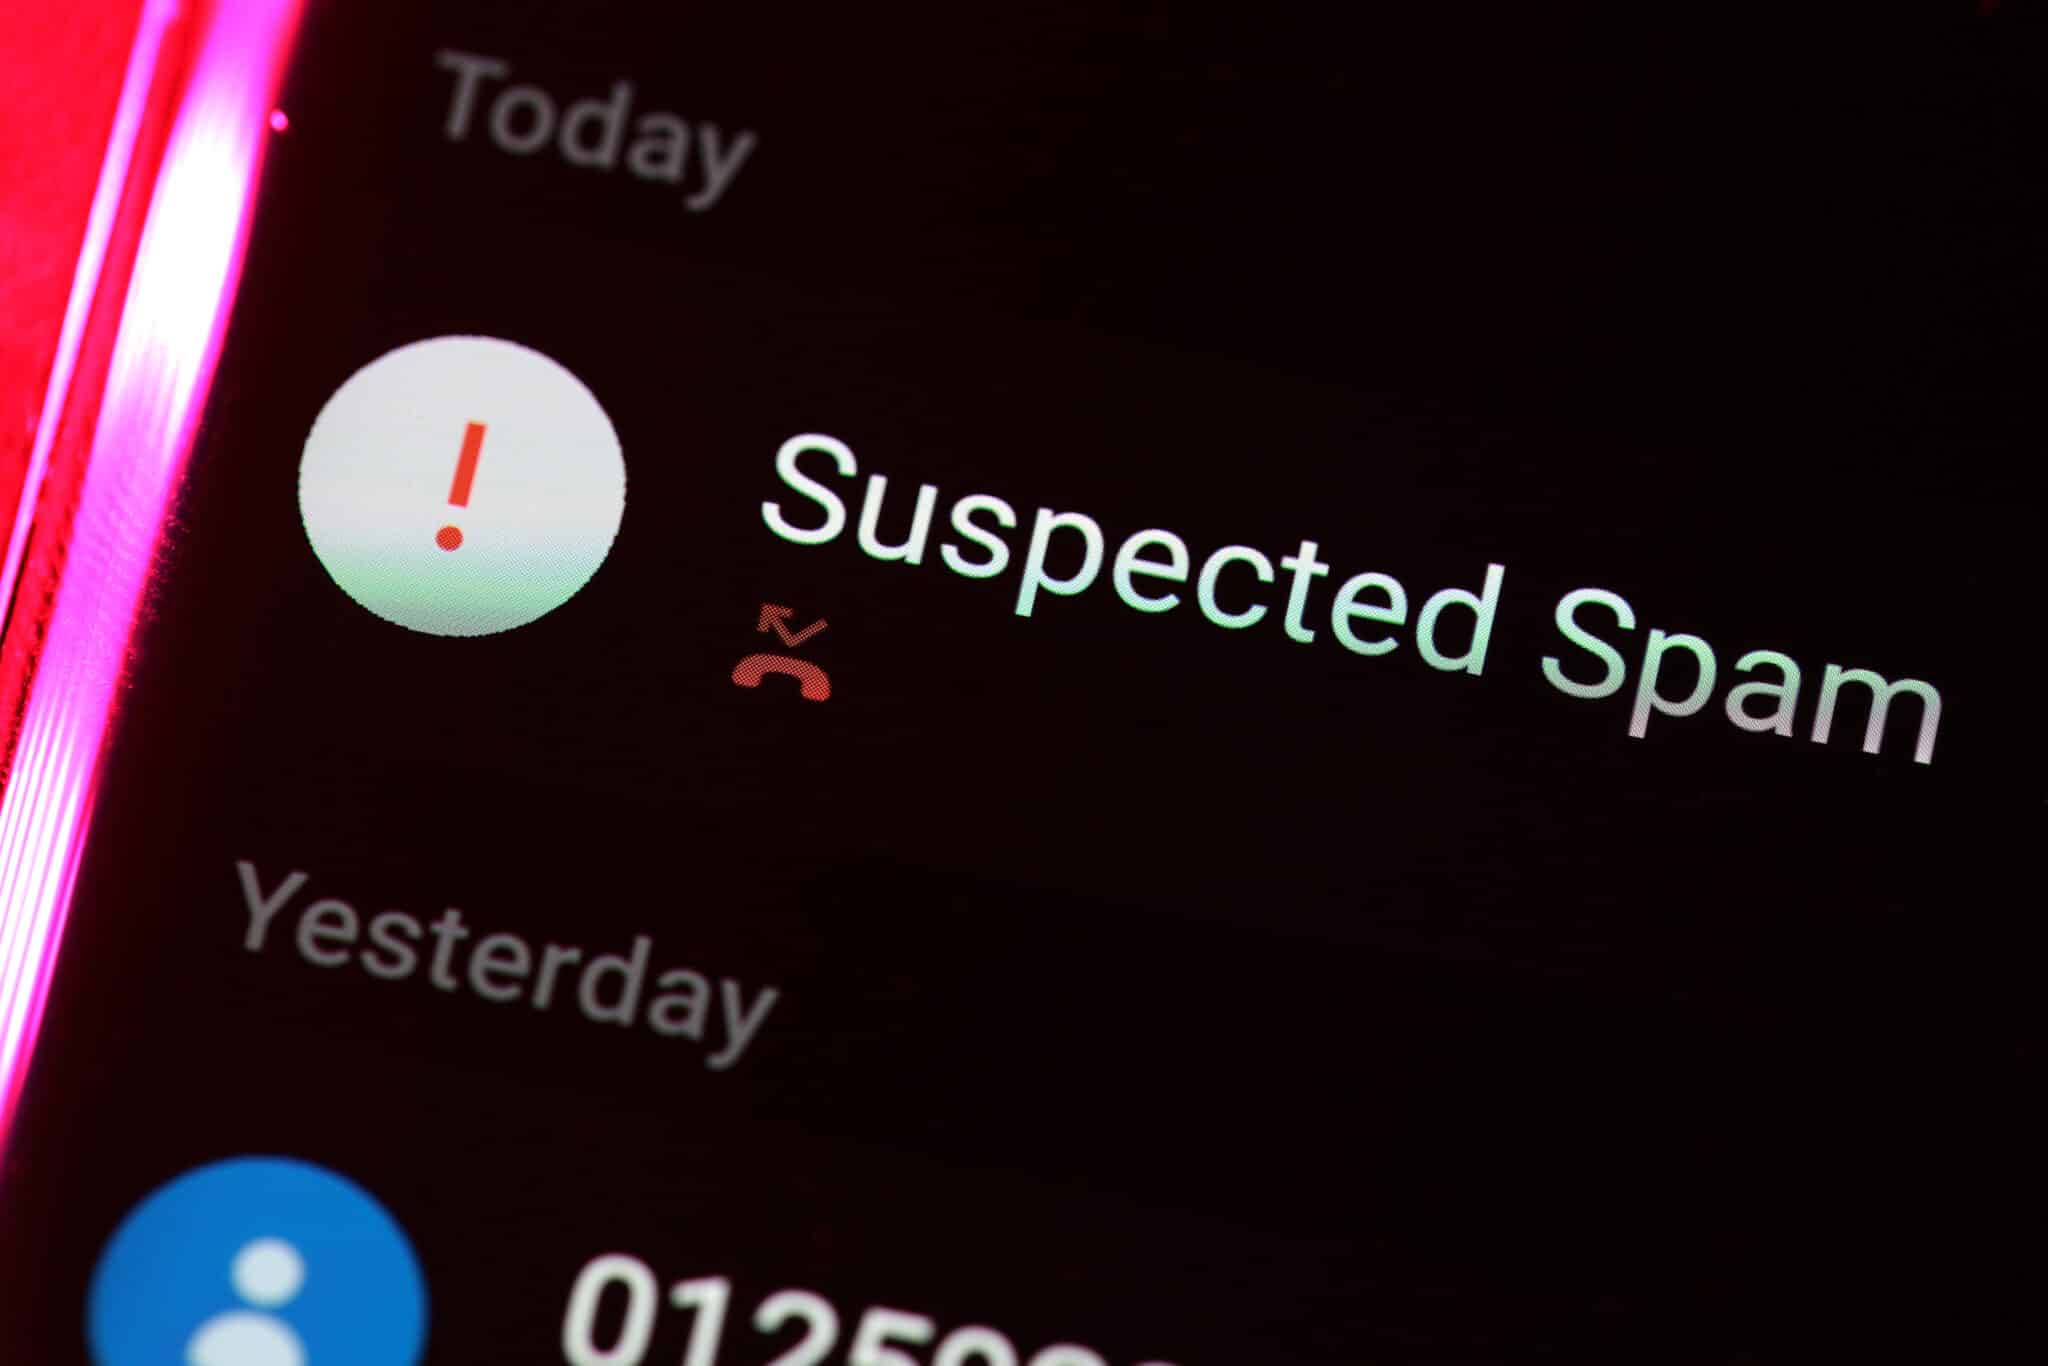 closeup of suspected spam caller alert on cell phone